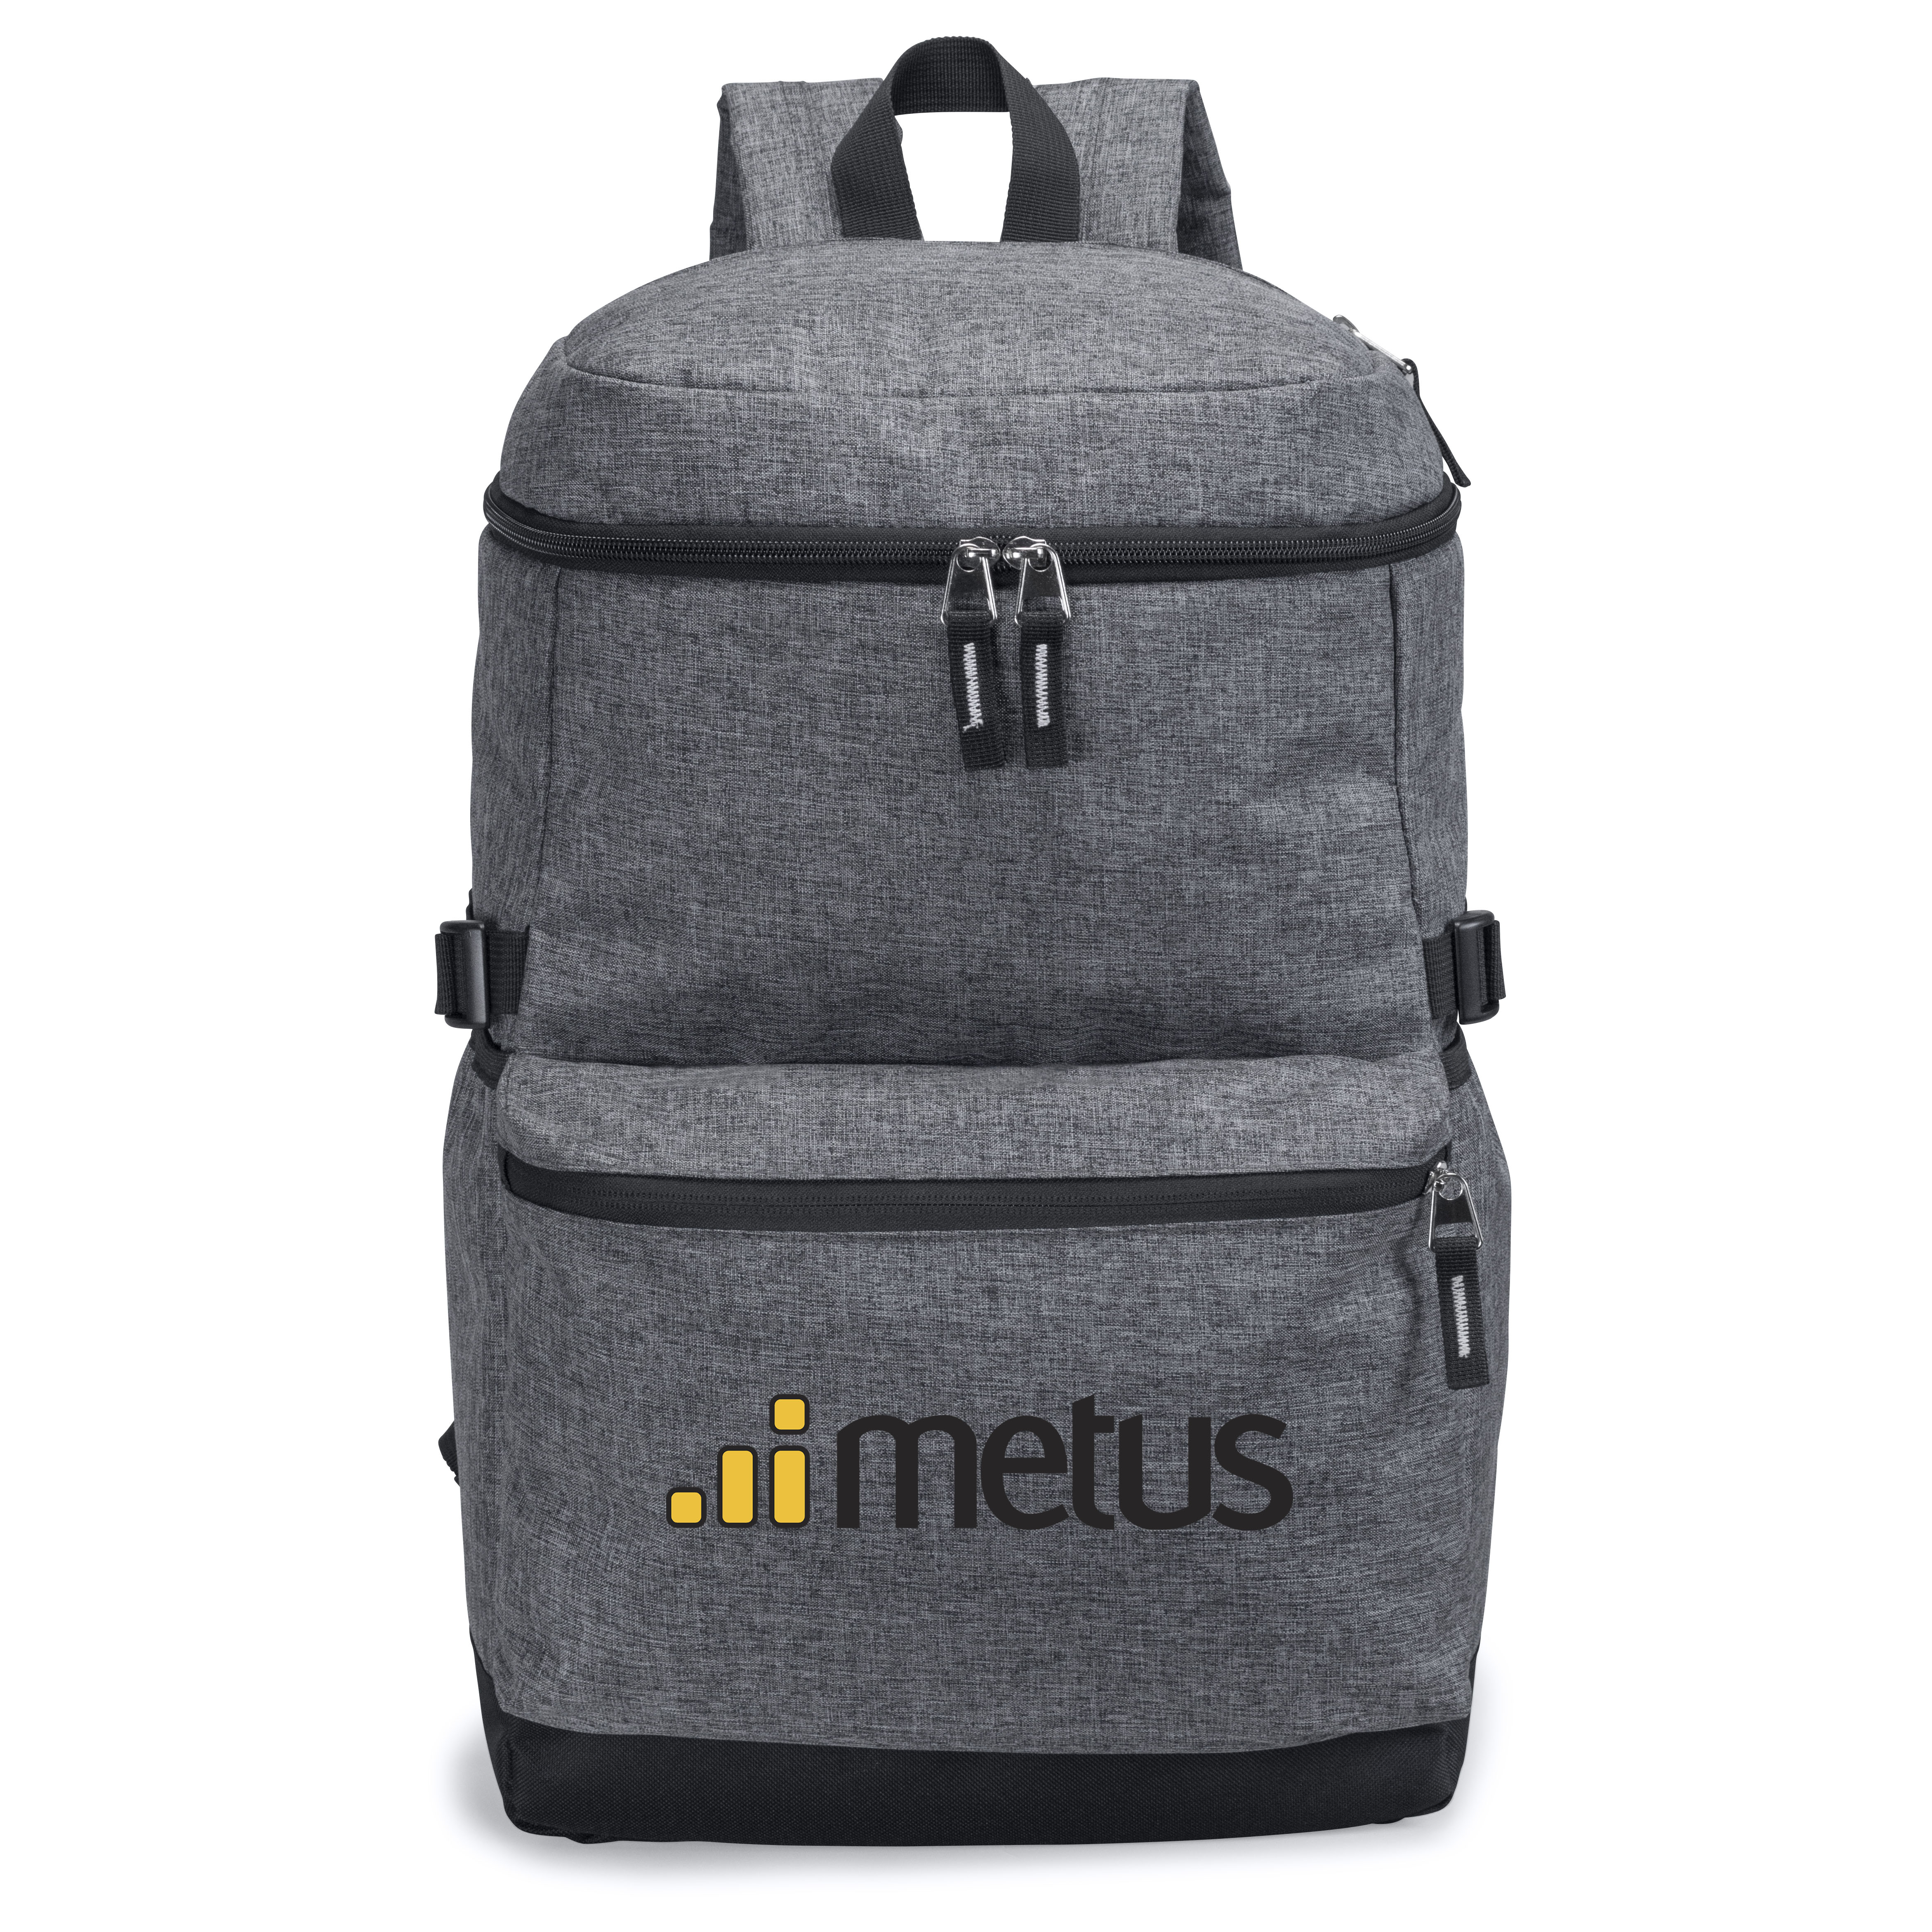 CHRISTIAN COMPUTER BACKPACK